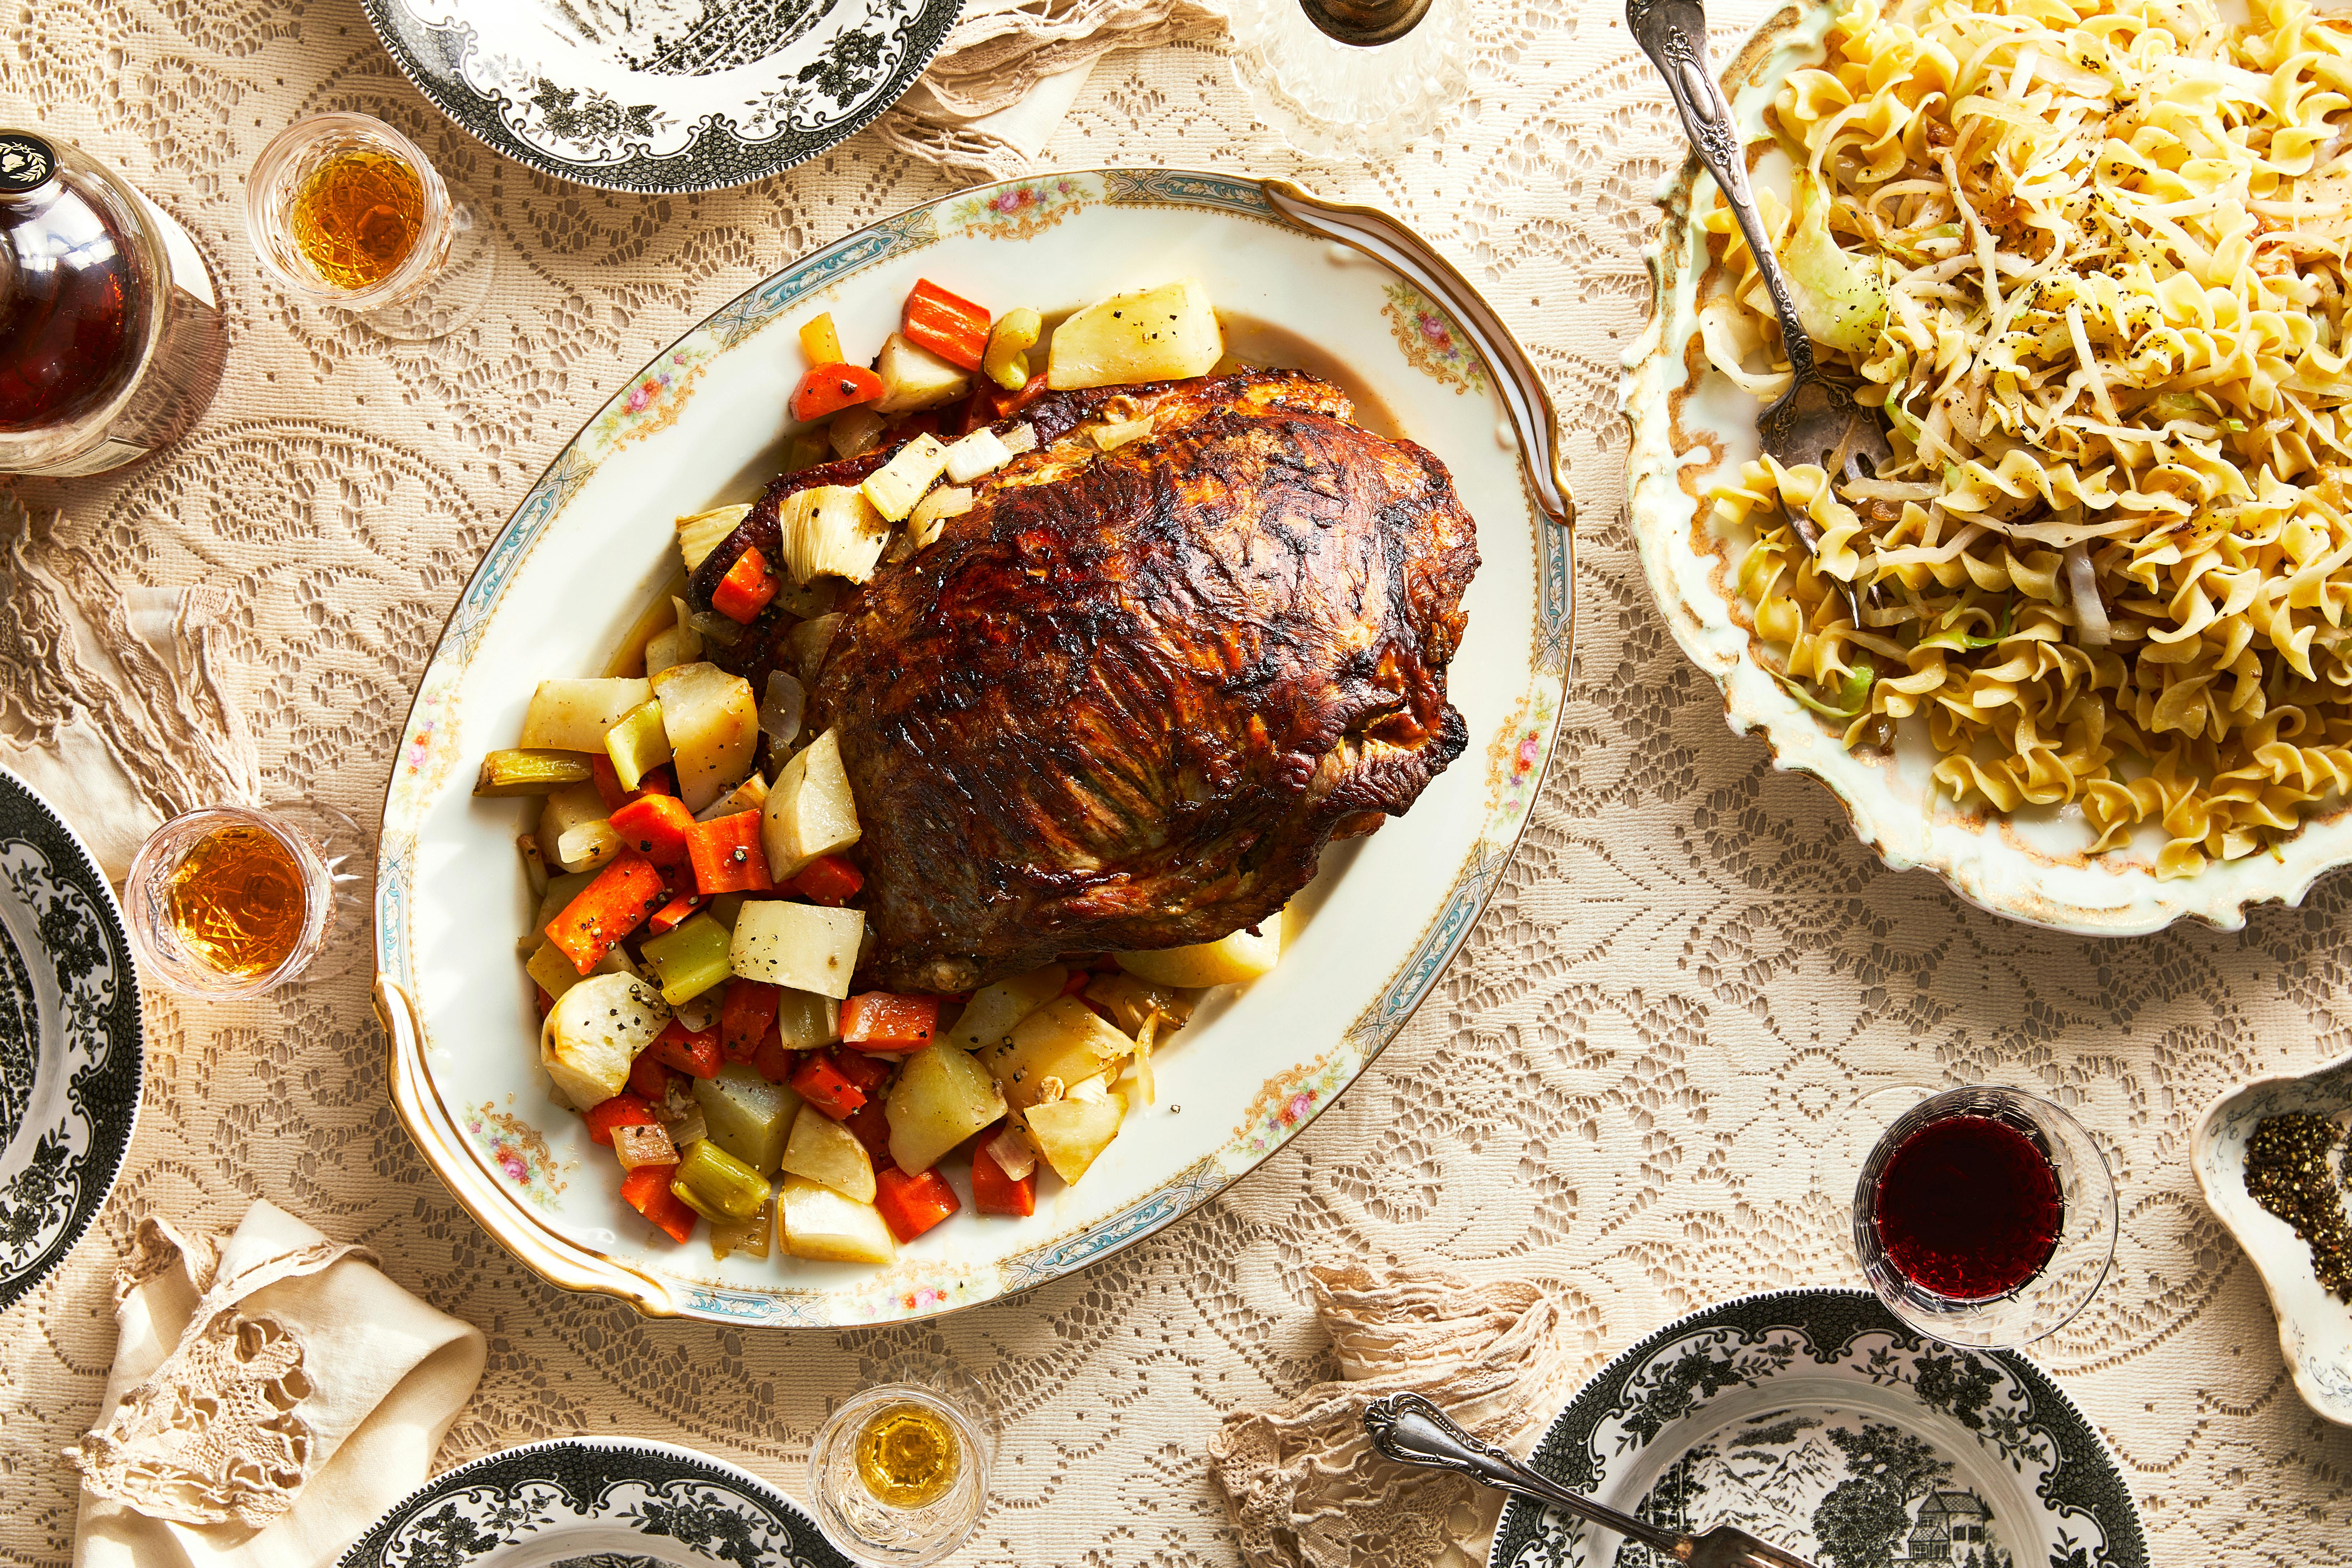 A Slovakian table set with a stuffed veal breast with roasted vegetables, sweet cabbage noodles, and glasses of wine alongside, atop a cream-colored lace tablecloth.